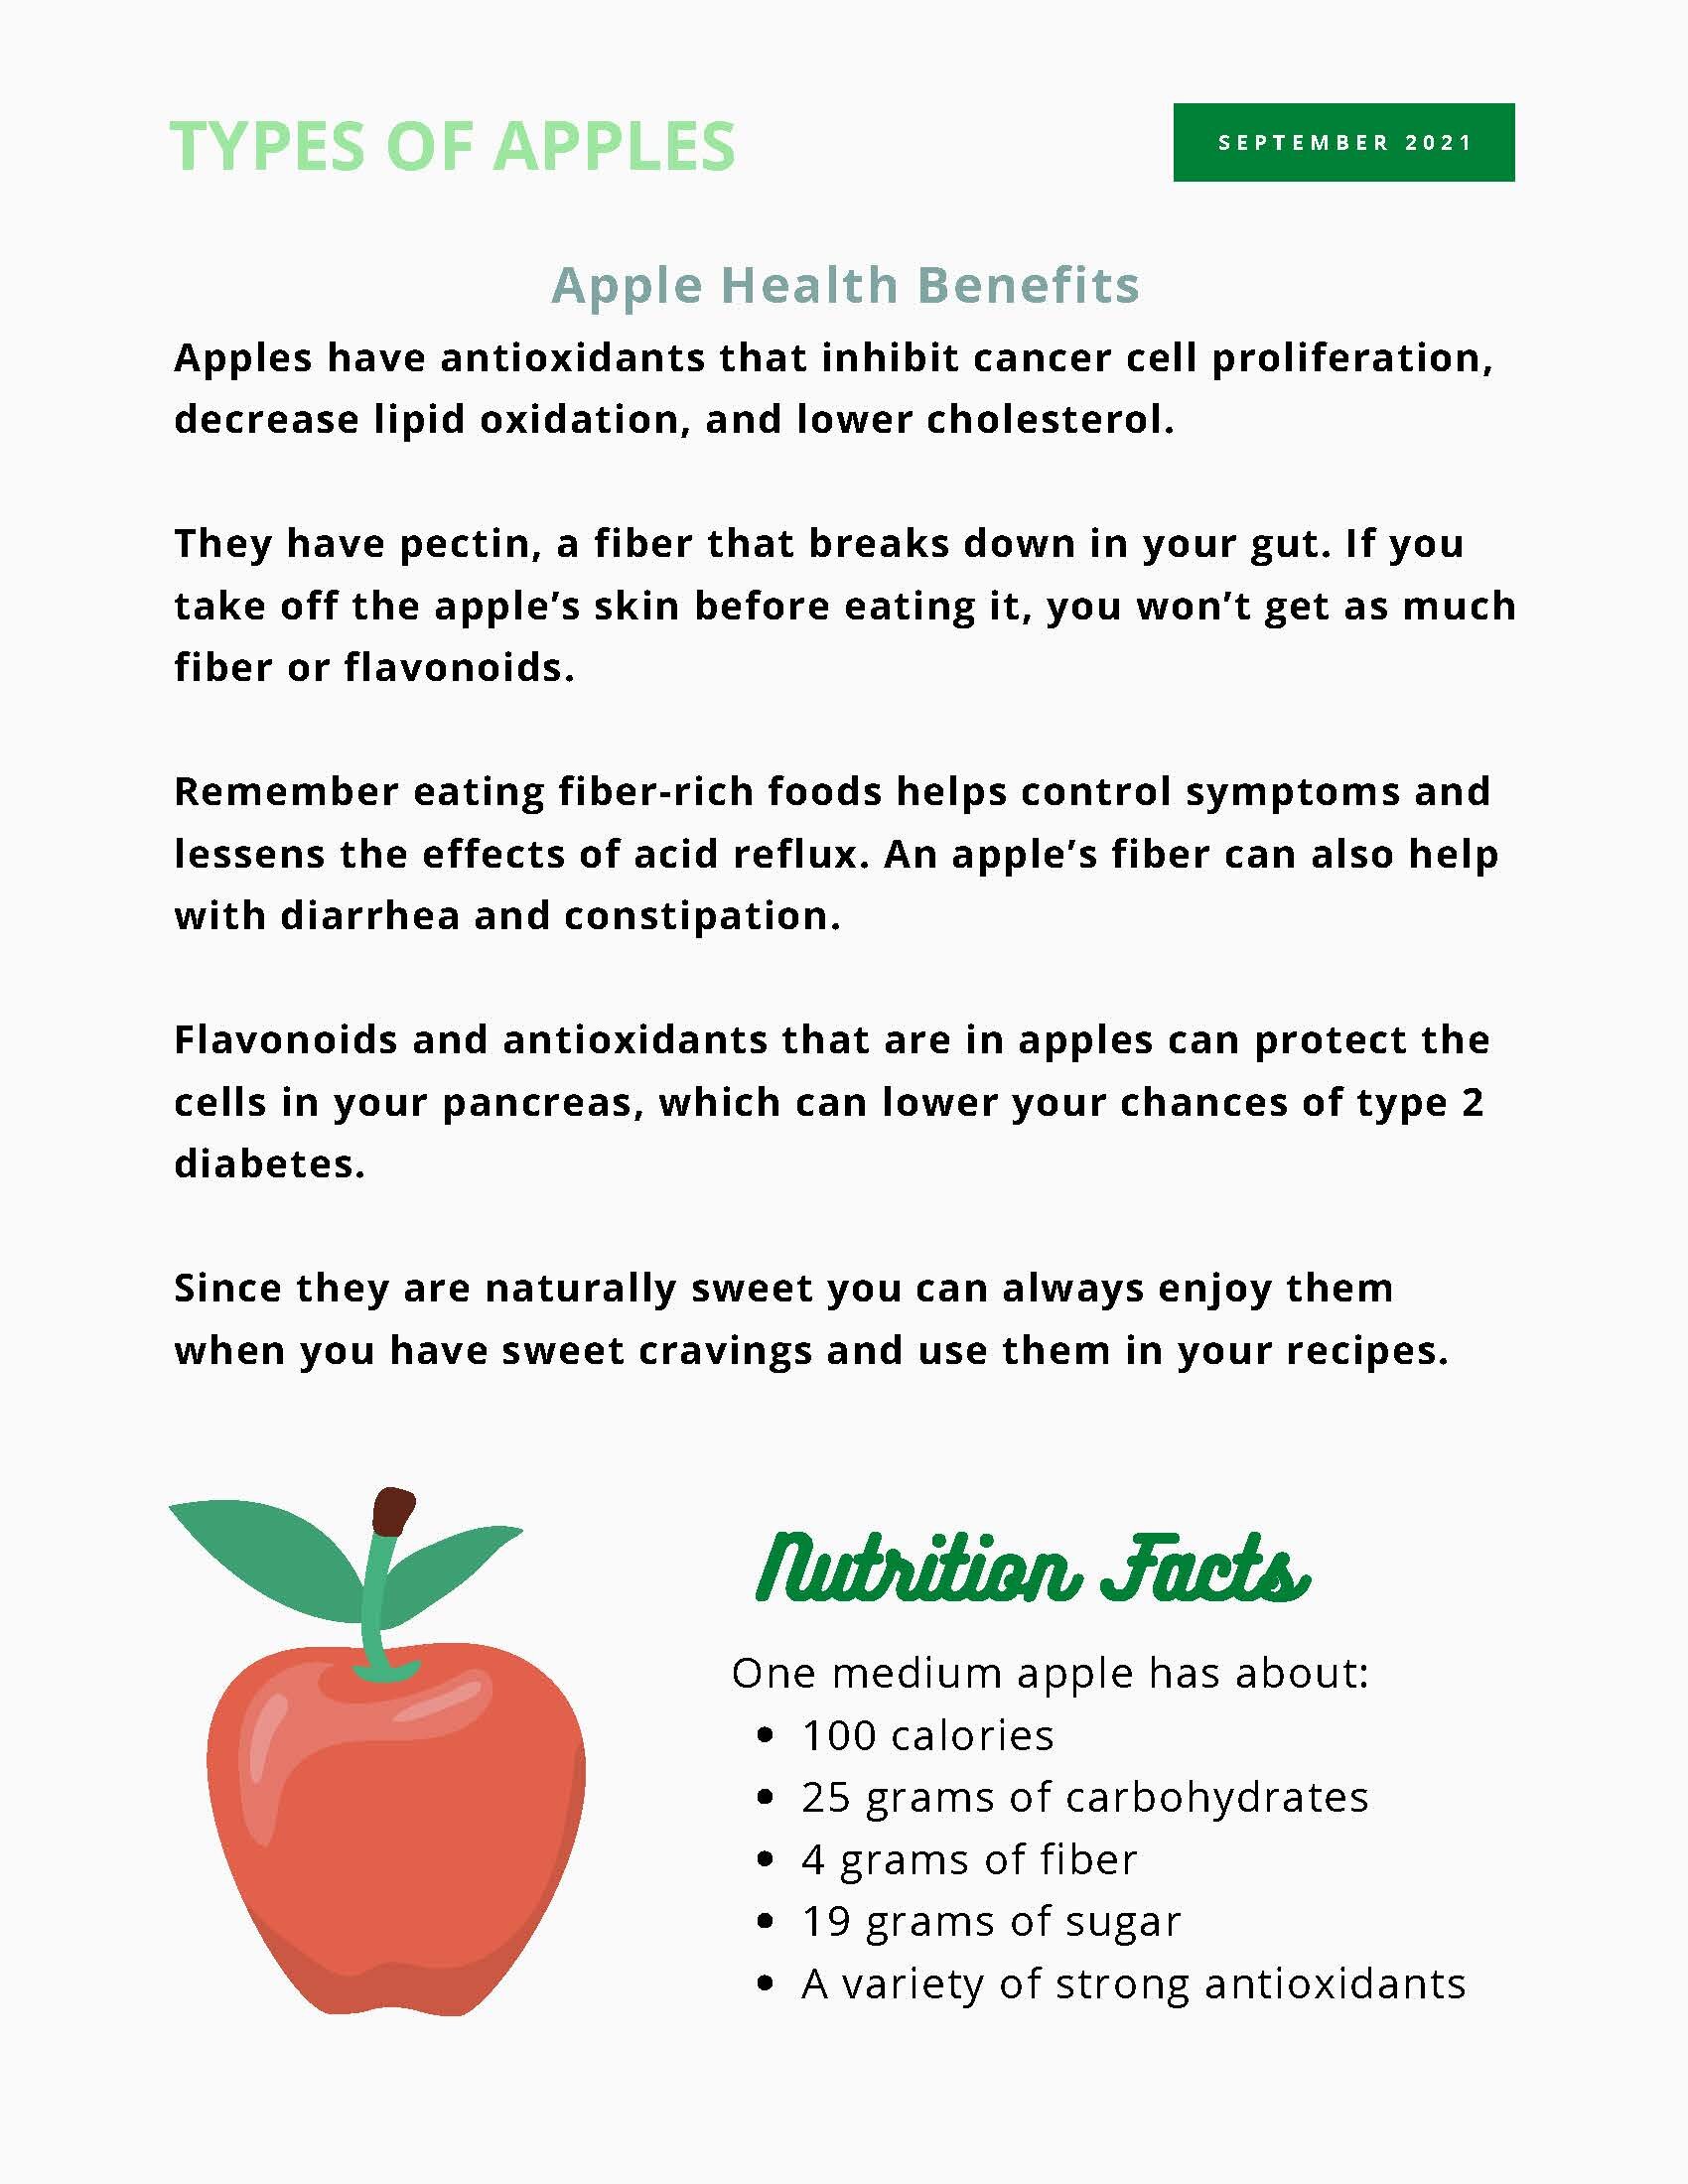 What Are the Health Benefits of Apples?